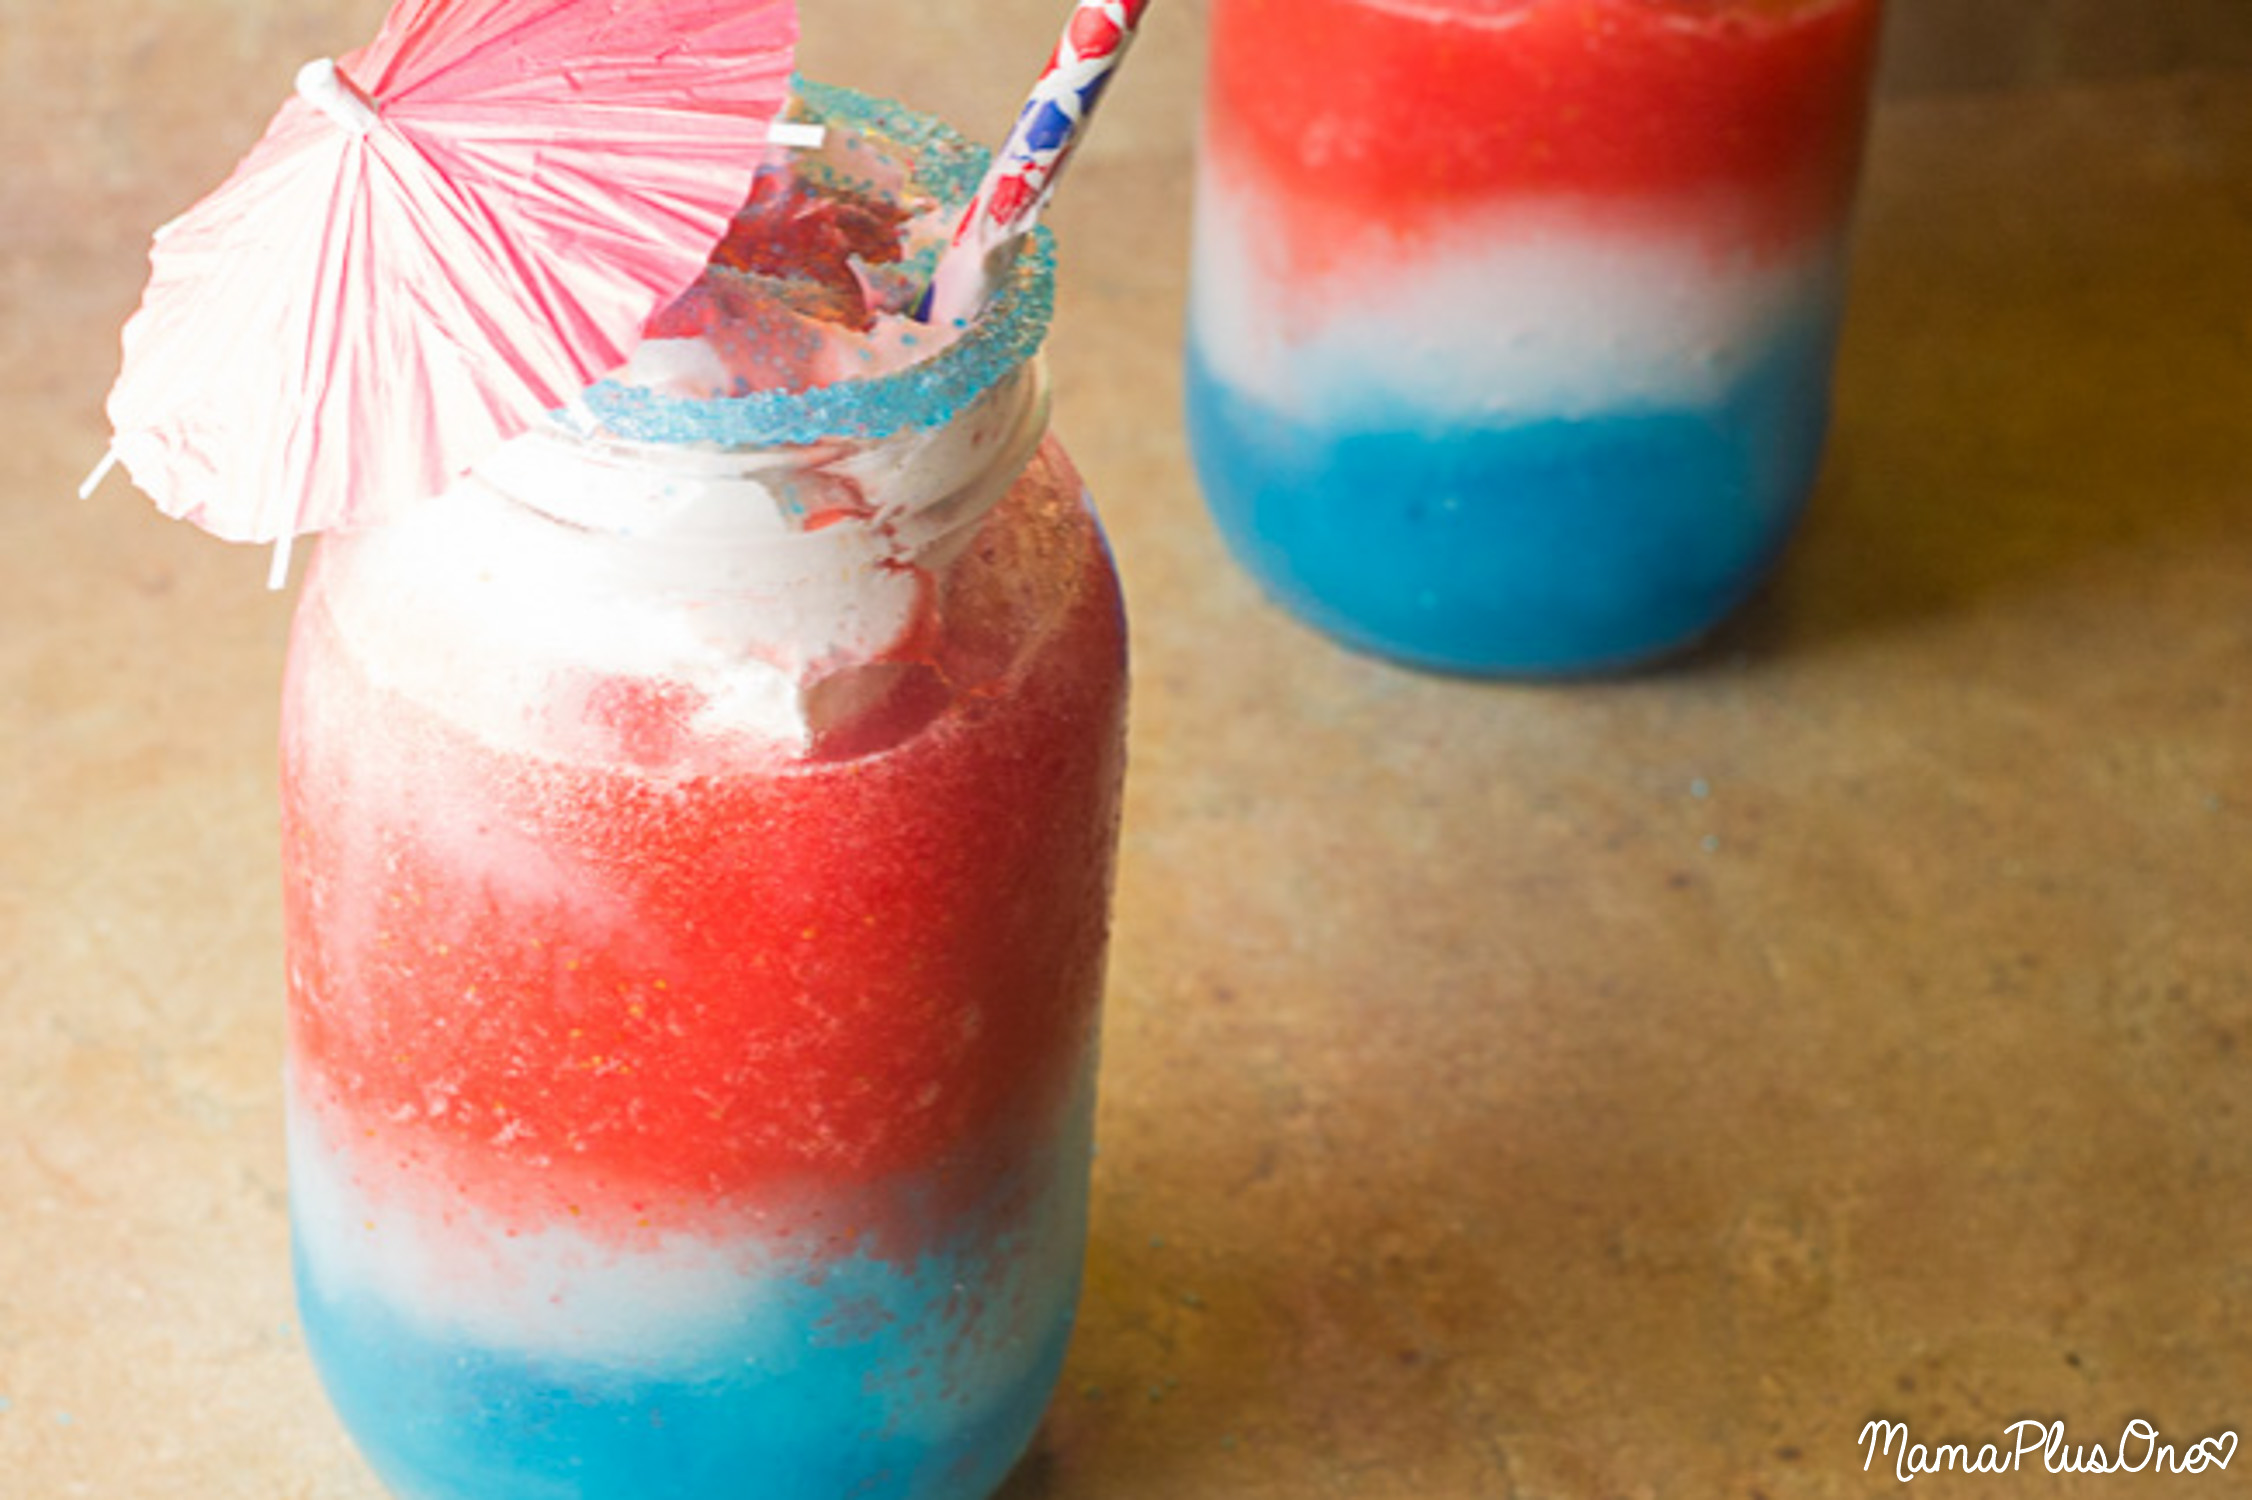 Celebrate the 4th of July with these red, white, and blue slushes that are easy to make and super refreshing! They're the perfect Independence Day mocktail that the whole family will love! Get star-spangled and layer them, or enjoy the individual components. You can't go wrong with this patriotic drink!